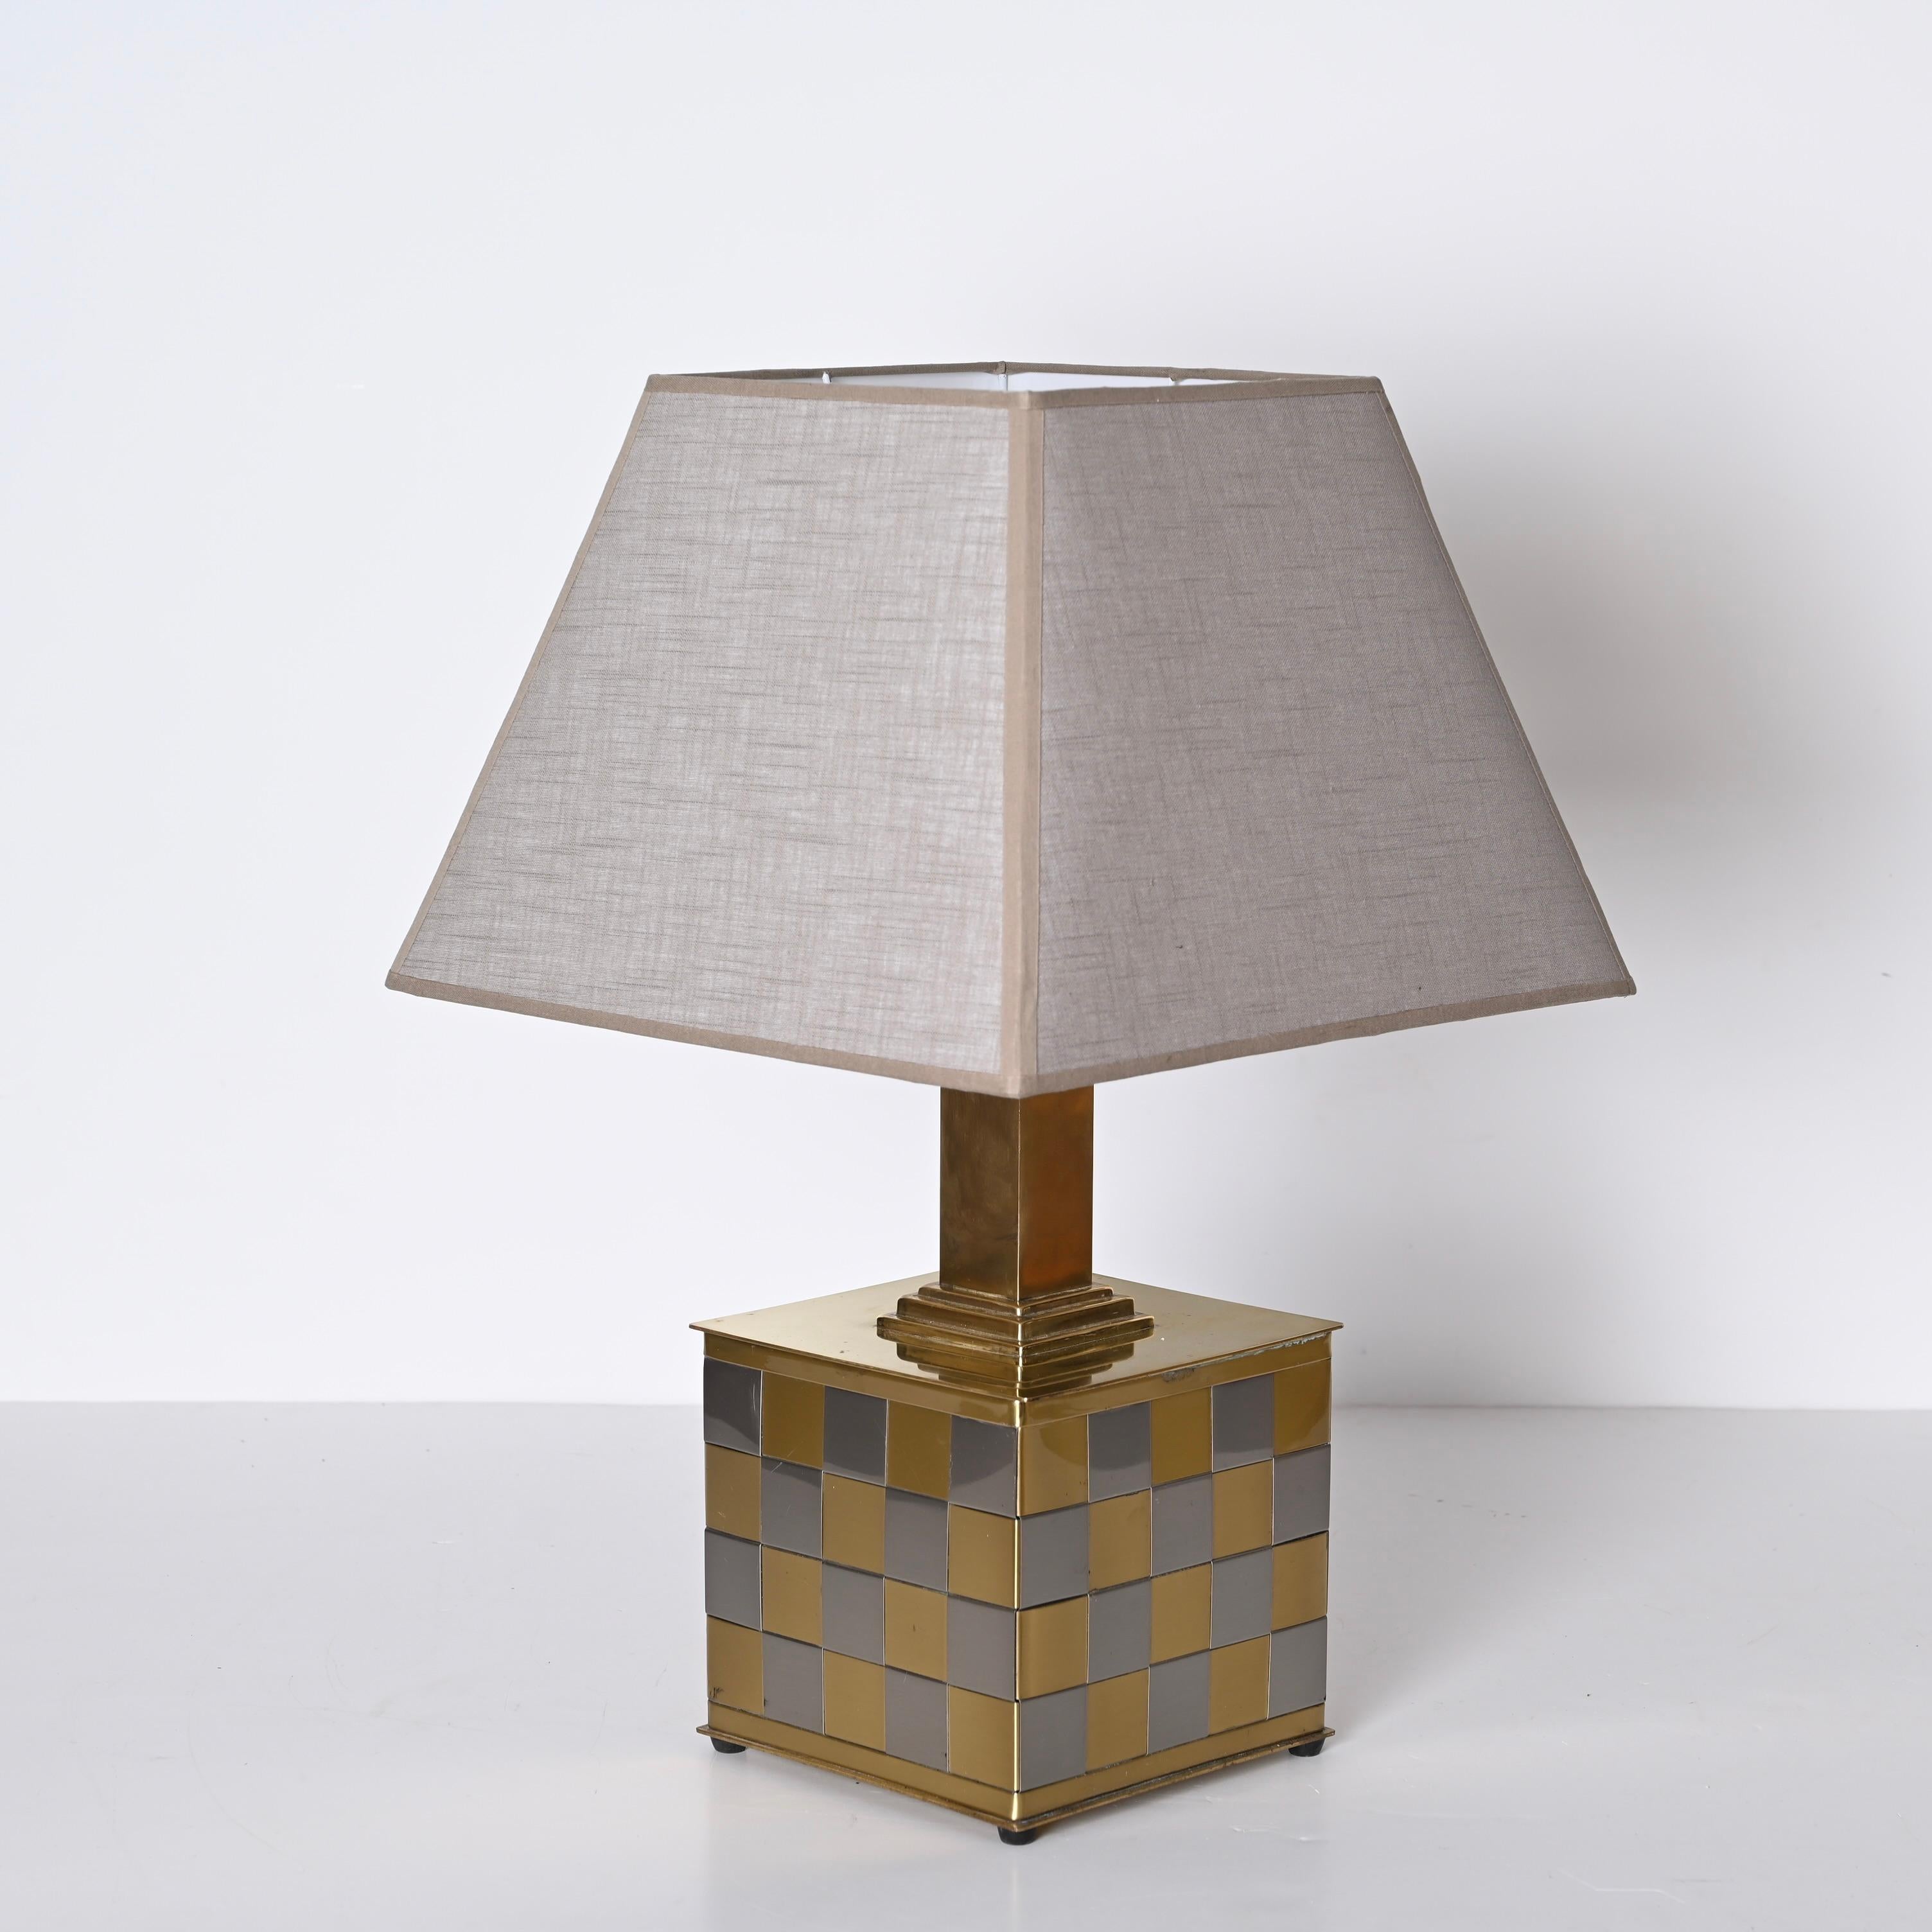 Midcentury Brass and Chrome Table Lamp, Willy Rizzo, Italy 1970s For Sale 7